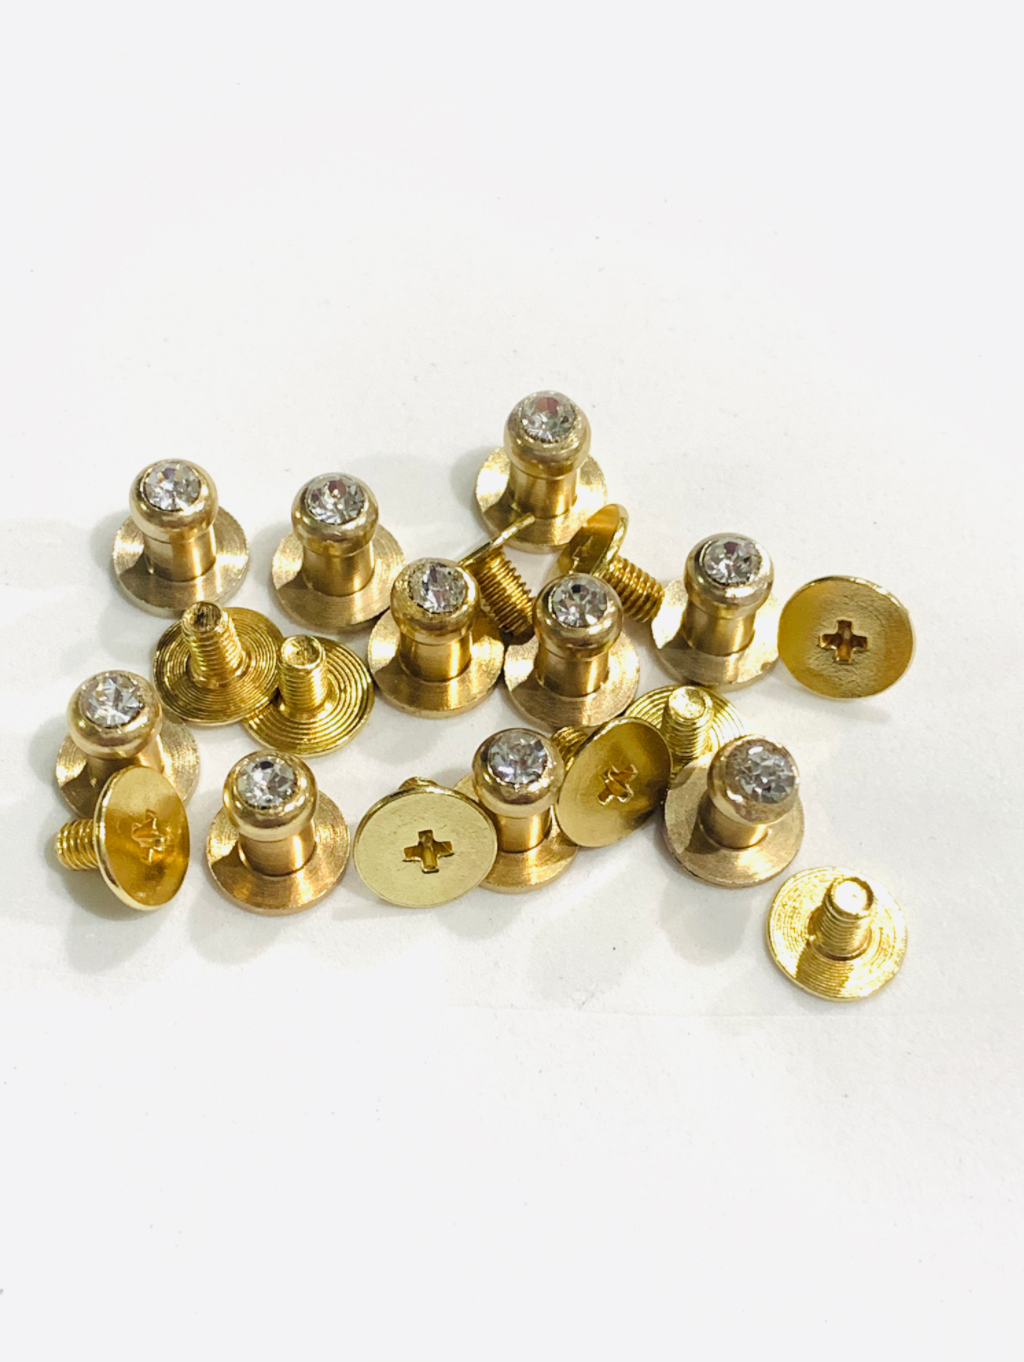 Sam Browne Studs Screw Rivet with and without Stone - Lots of 10 or 26 - Gold or Silver